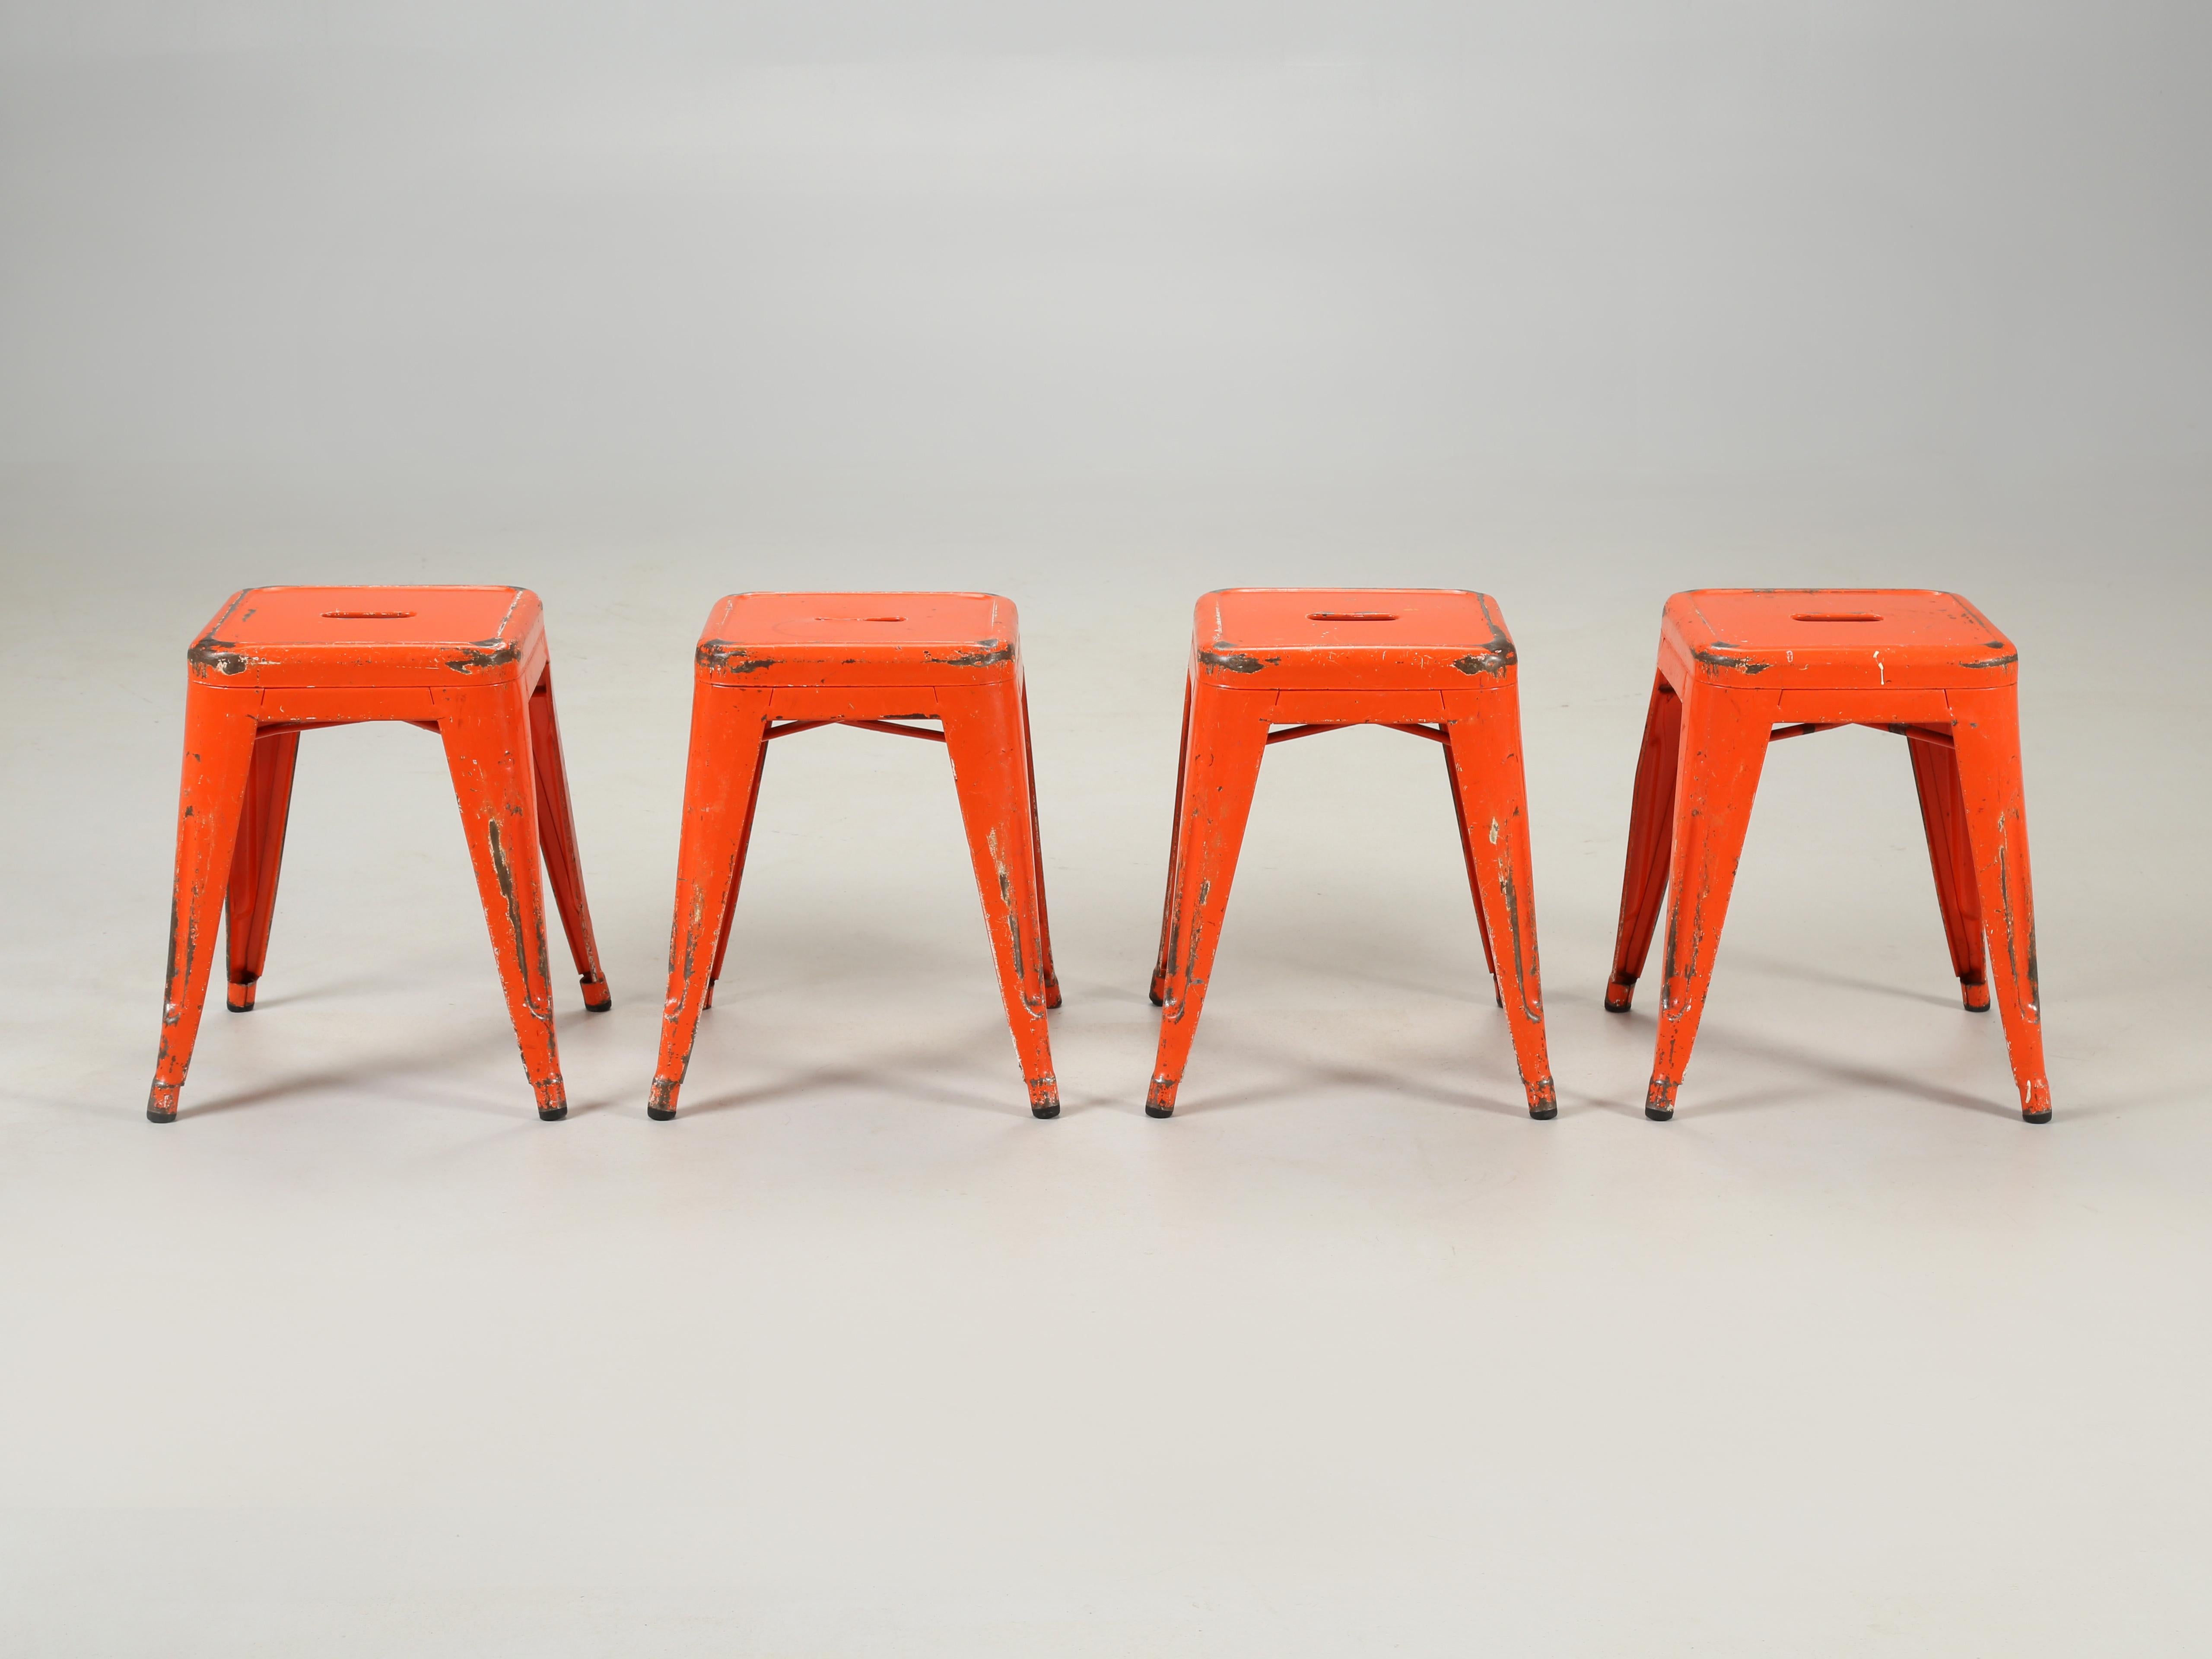 Genuine set of (4) Tolix steel stacking stools probably dating to the 1960's in a vibrant orange and yes, they are heavily distressed. We have hundred's of virtually new showroom samples available in (3) different heights. Dining table height as